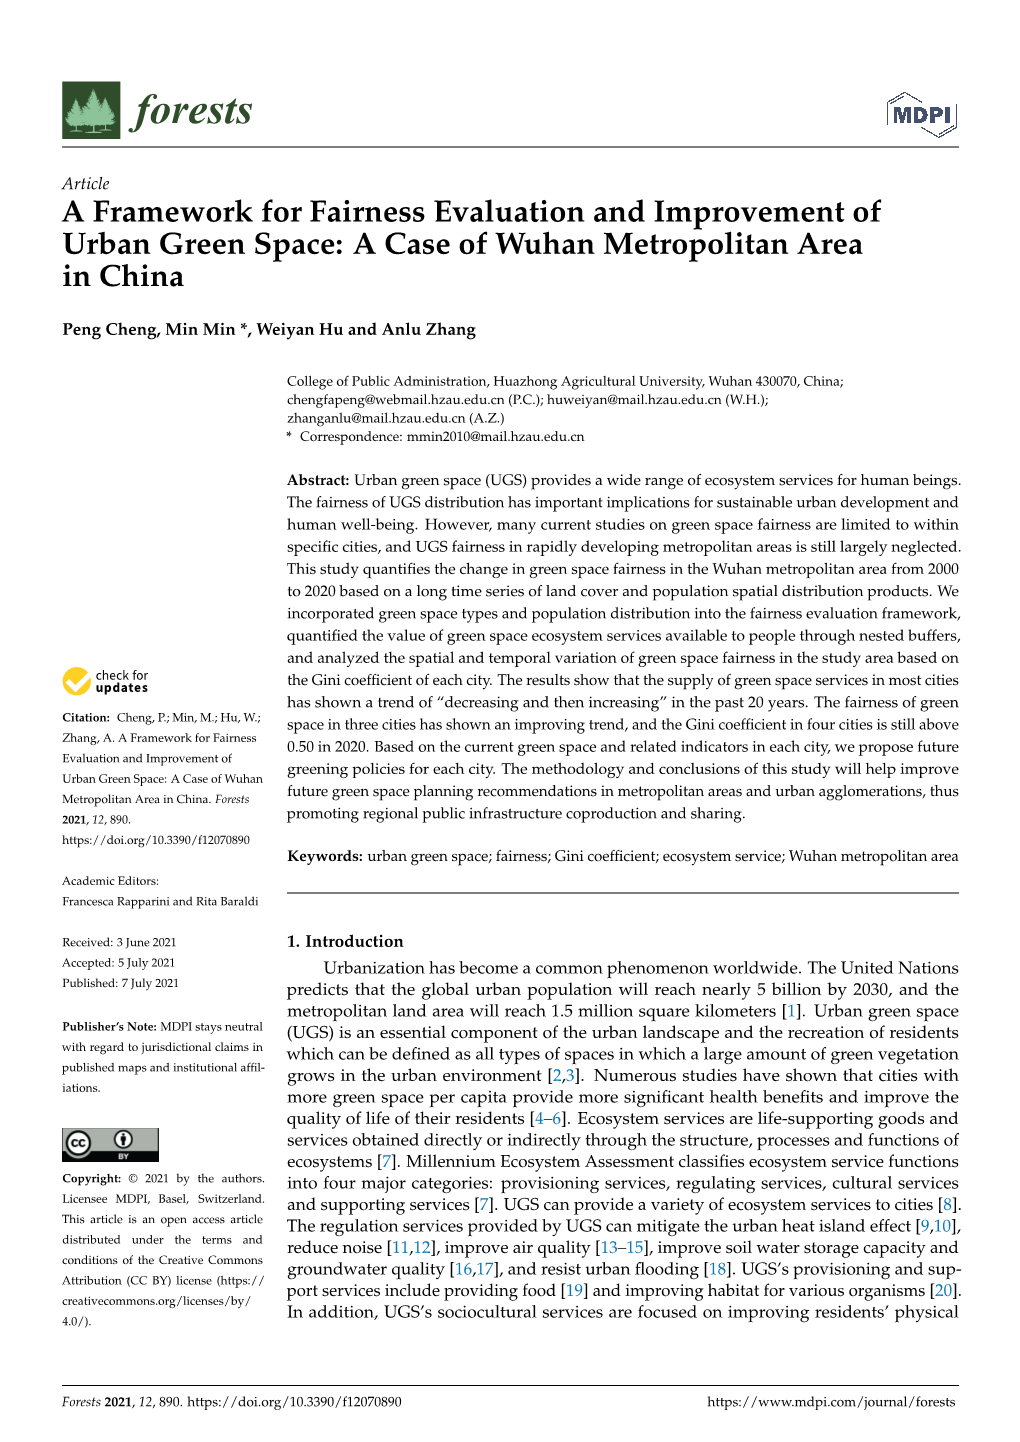 A Framework for Fairness Evaluation and Improvement of Urban Green Space: a Case of Wuhan Metropolitan Area in China